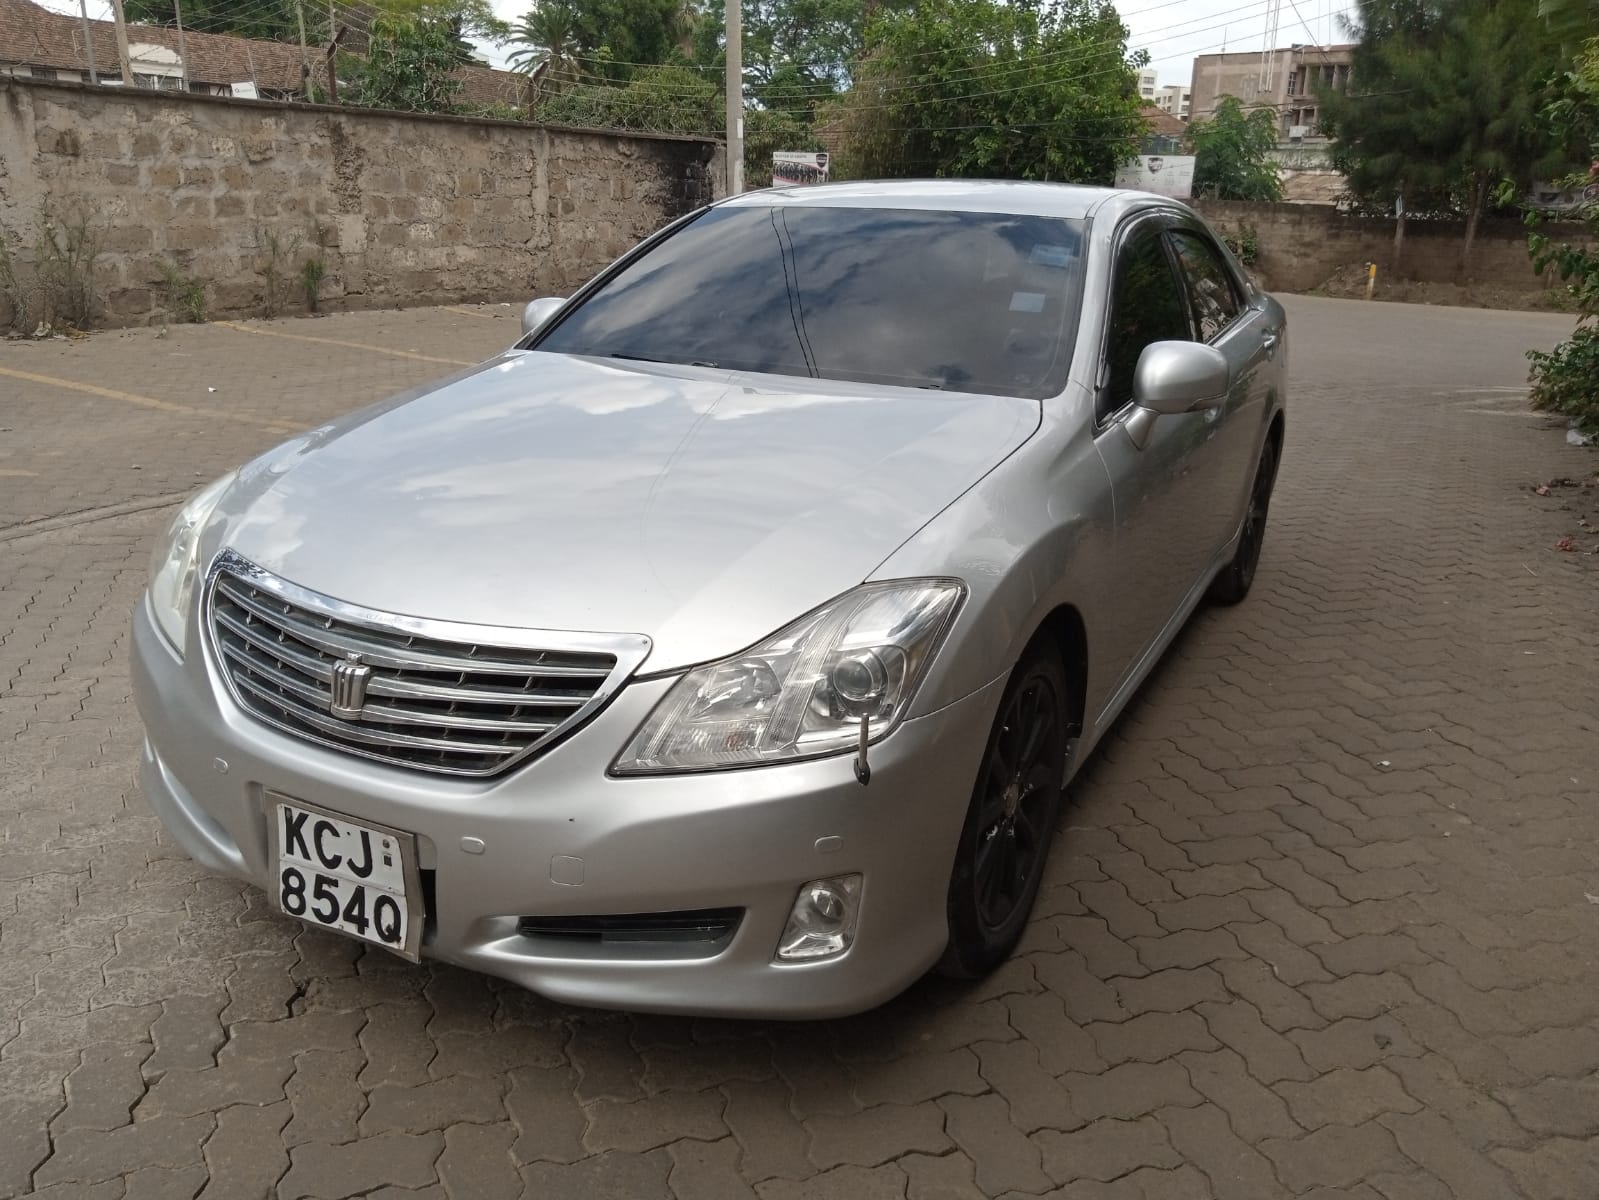 Toyota CROWN 2009 Royal Saloon You pay Deposit Trade in Ok Hot Deal